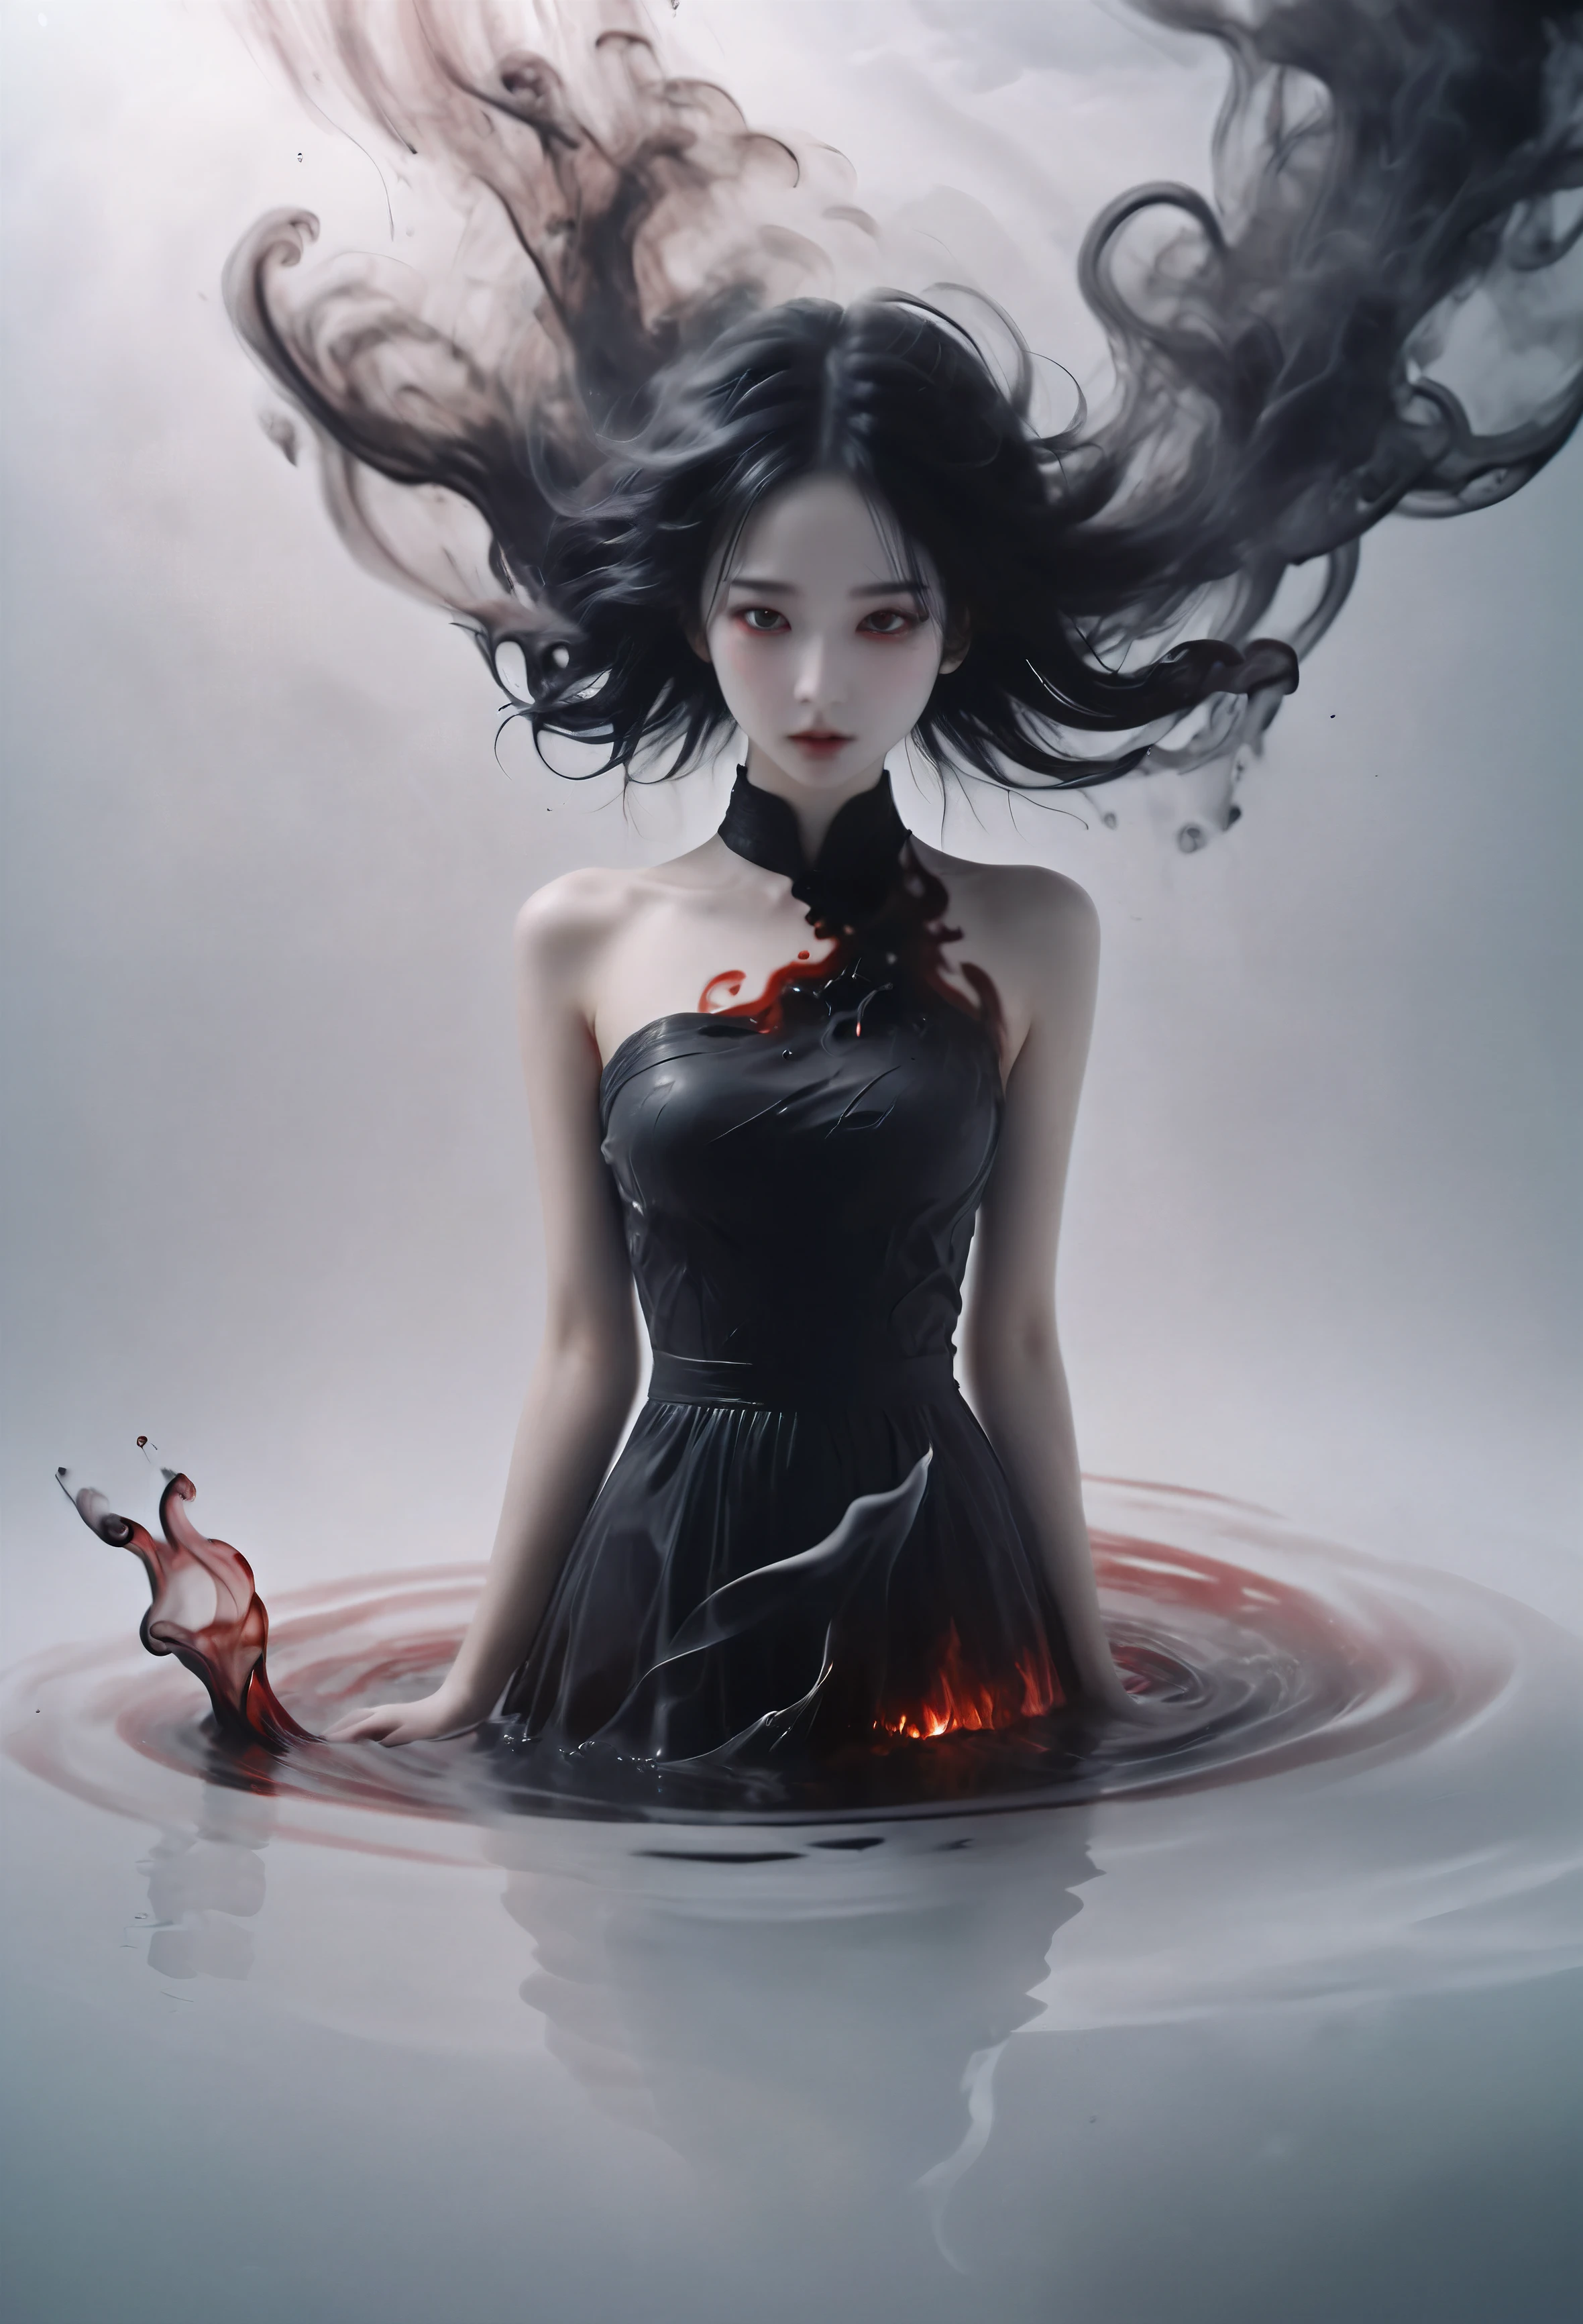 bailing_dark，A girl made up of black smoke，1 Long-haired girl，Some long hair flows naturally，turn into smoke，Have clear and beautiful facial features，The students are all red，cold expression，girl floating among water ripples，The background is pure white space，cigarette